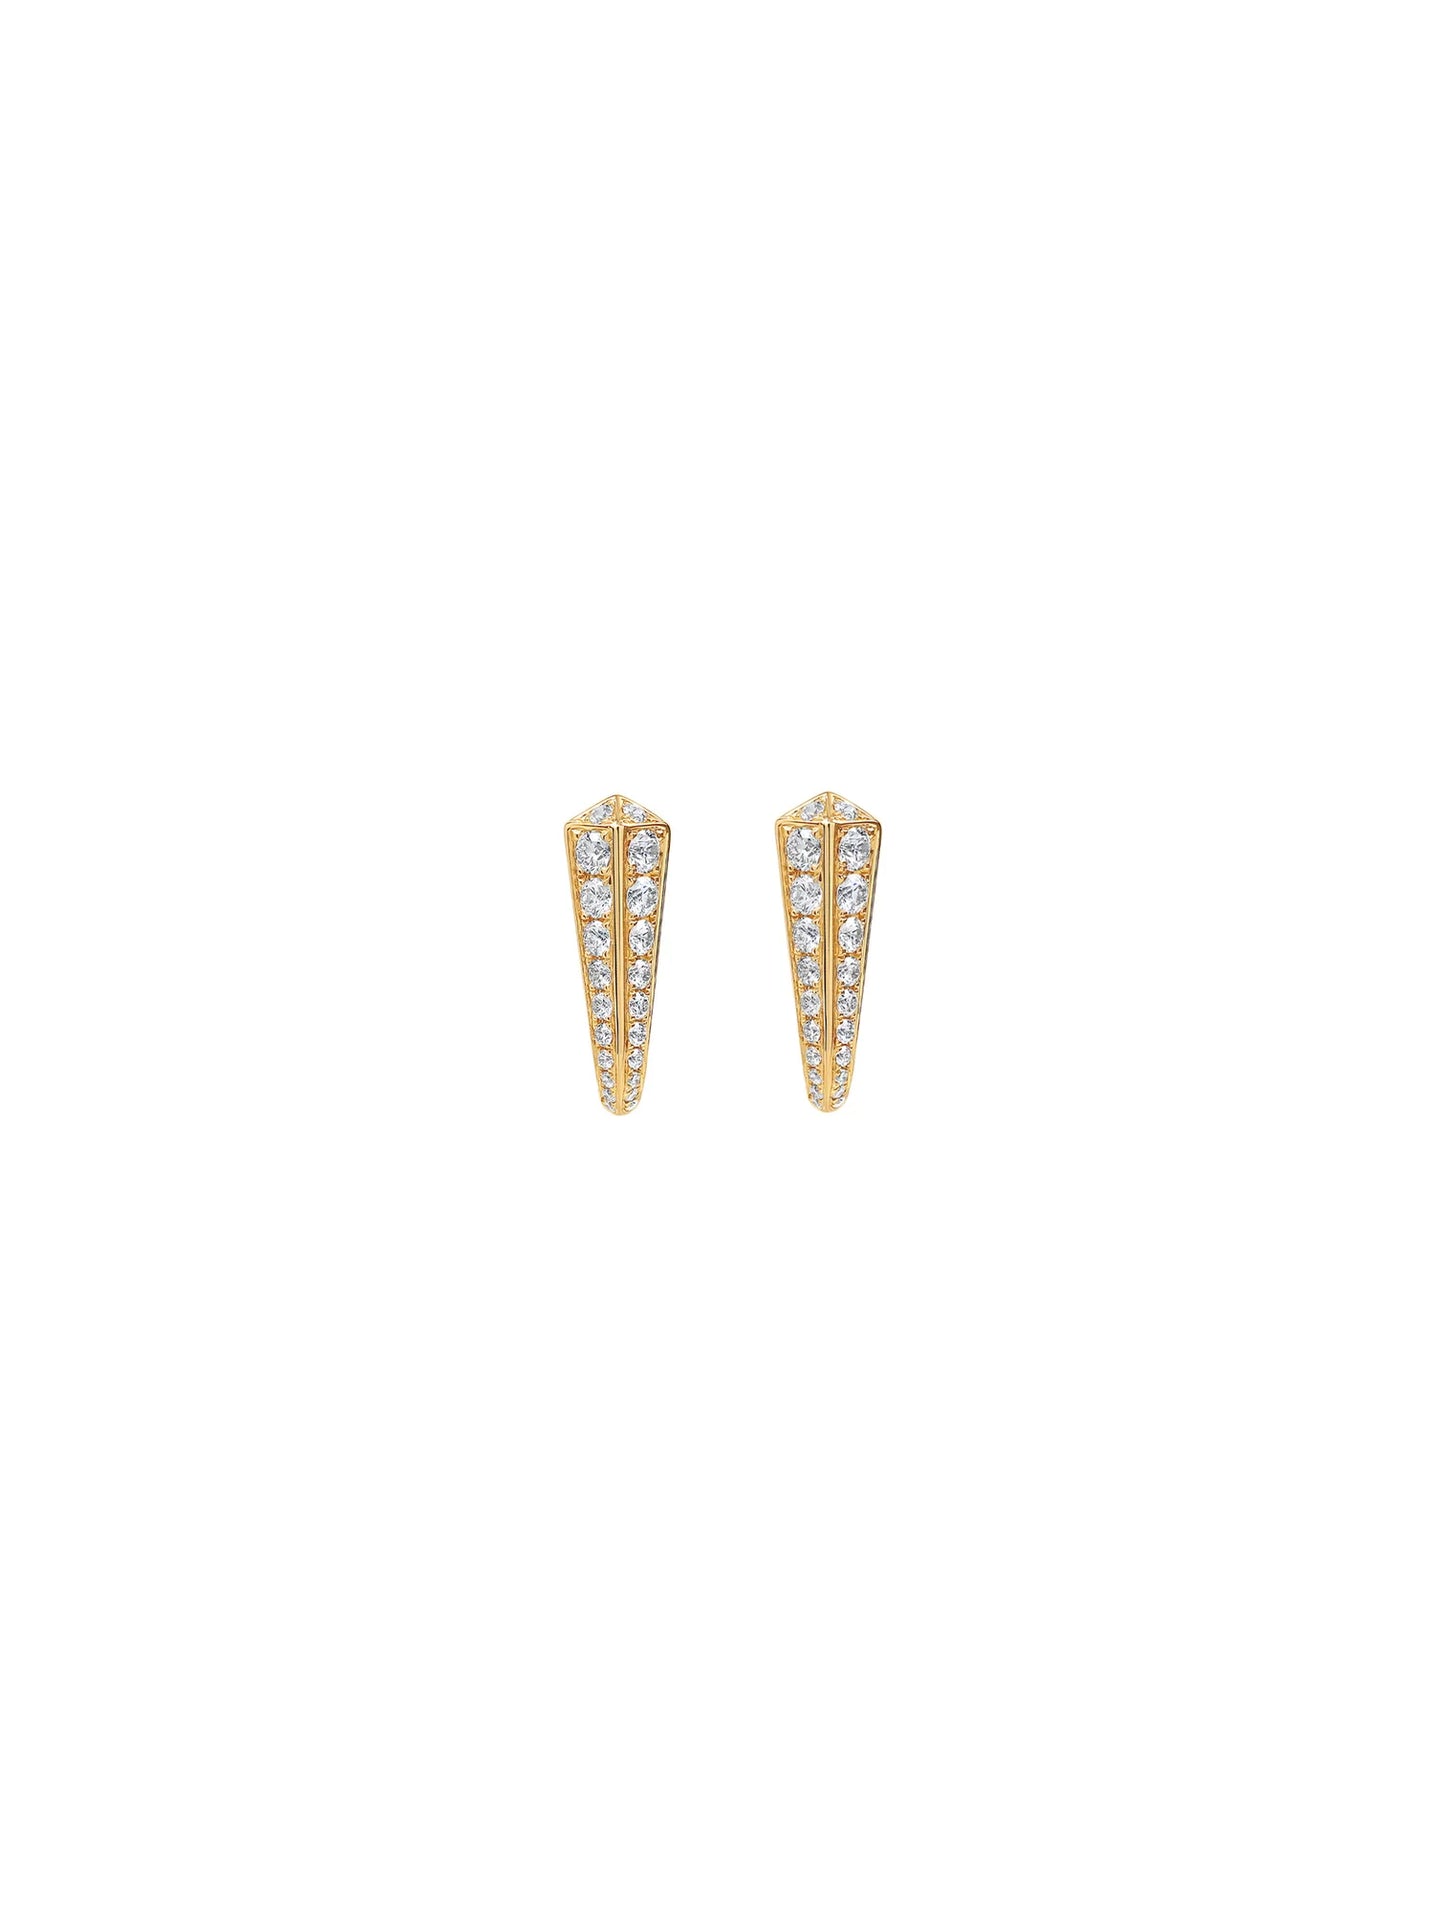 State Property Borsh Pave Earrings